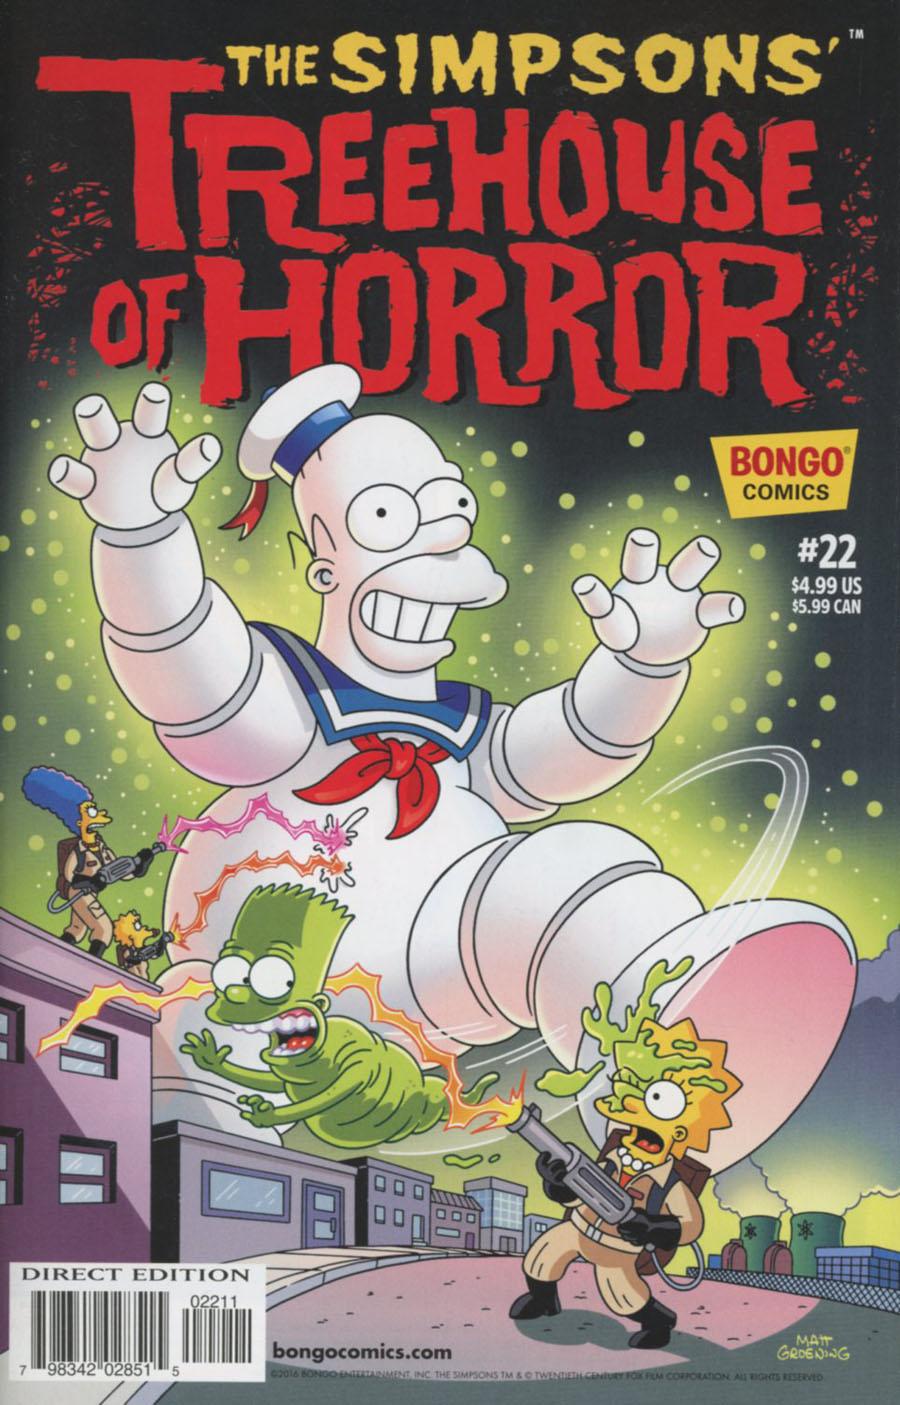 Simpsons Treehouse Of Horror Vol. 1 #22